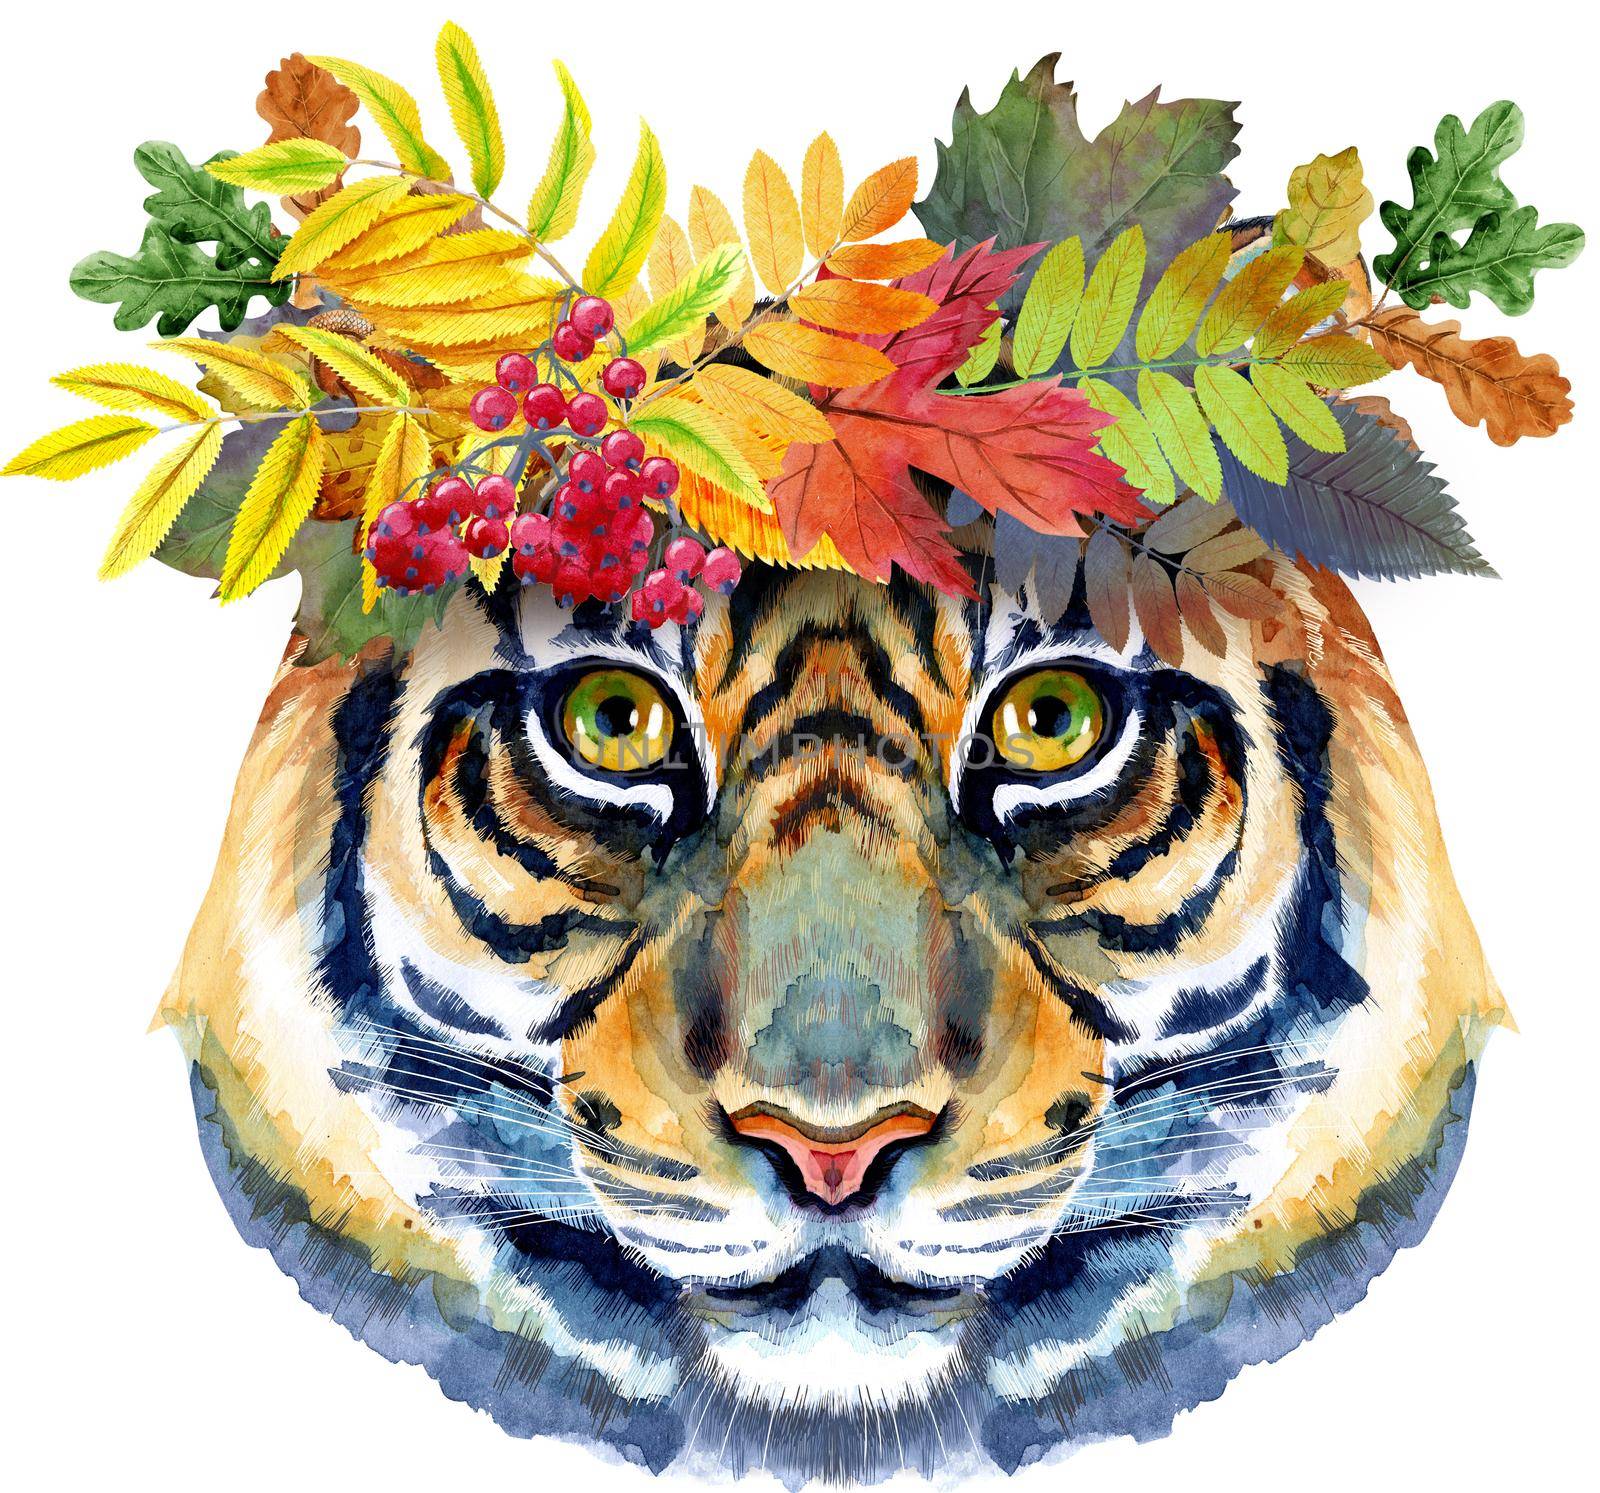 Tiger in a wreath of autumn leaves. Horoscope character watercolor illustration isolated on white background. by NataOmsk